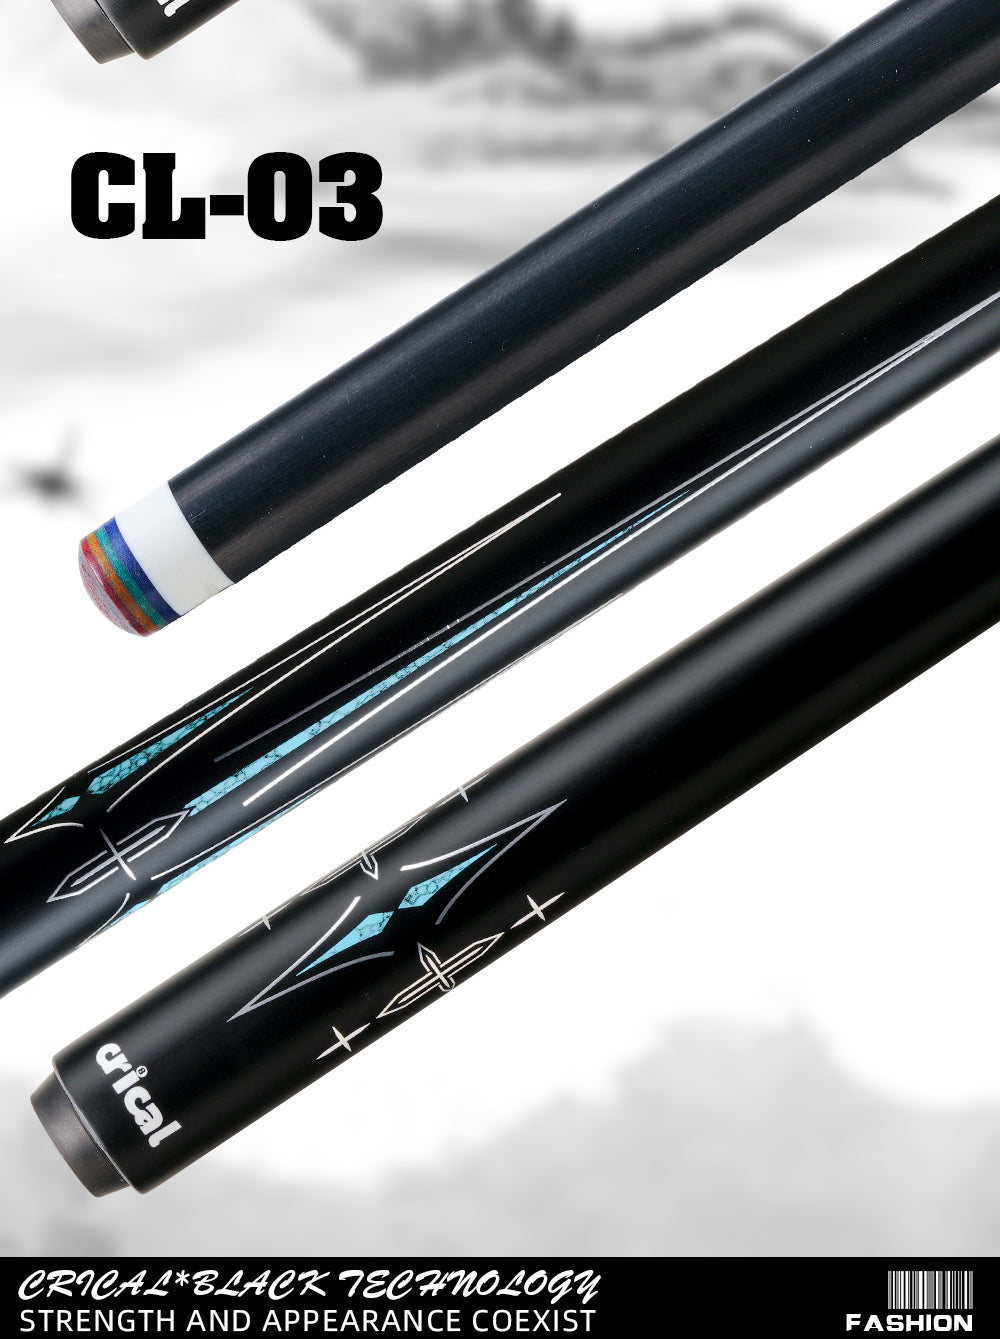 CRICAL CL-02/03 Carbon Fiber Pool Cue Stick Black Technology Low Deflection 12.4mm Tip Radial Joint Professional 1/2 Billiard